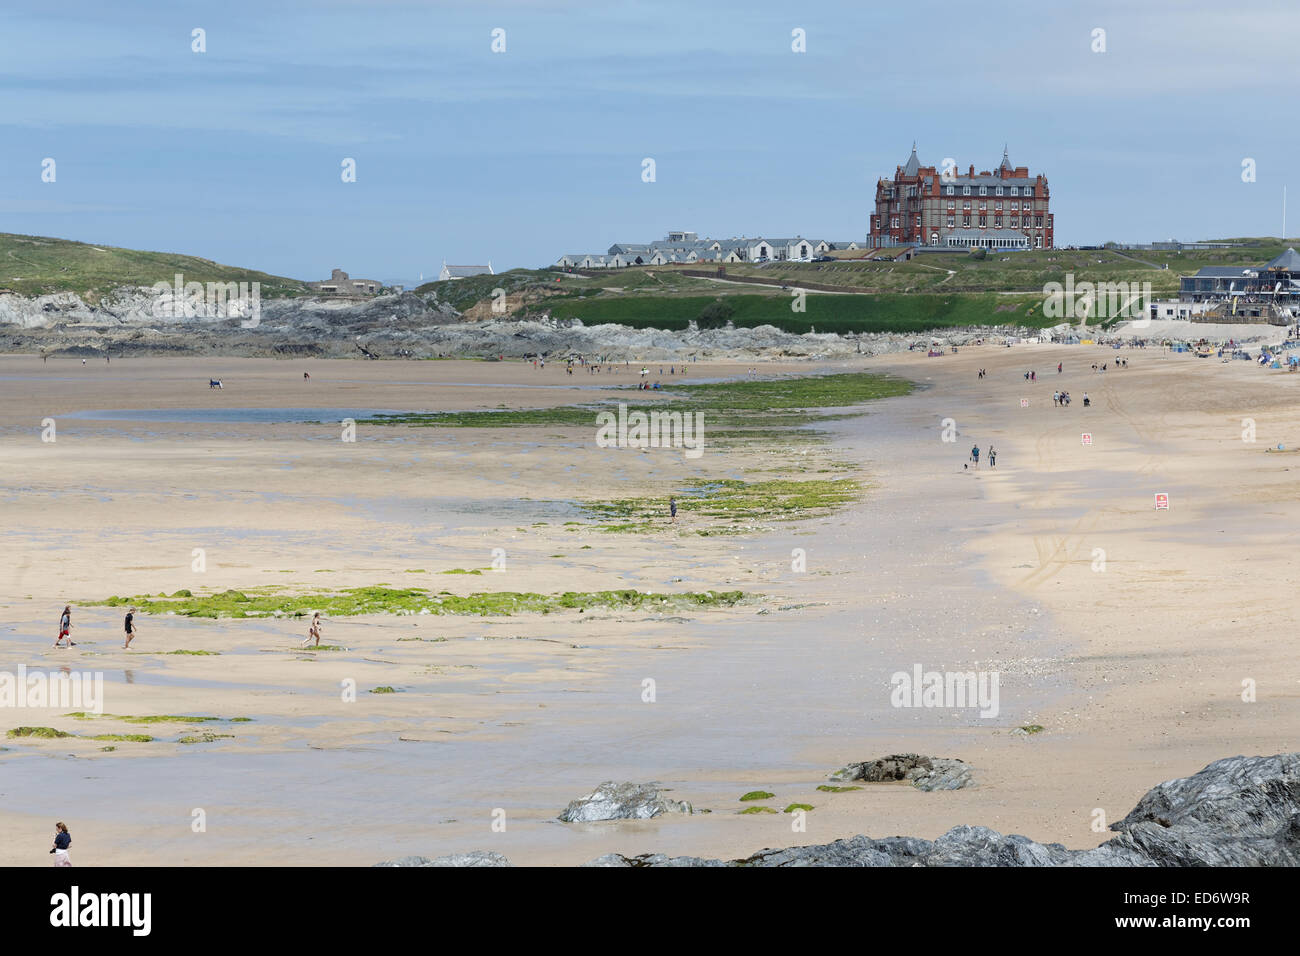 Headland Hotel ahead of Fistral beach in Newquay, Cornwall, UK. Stock Photo